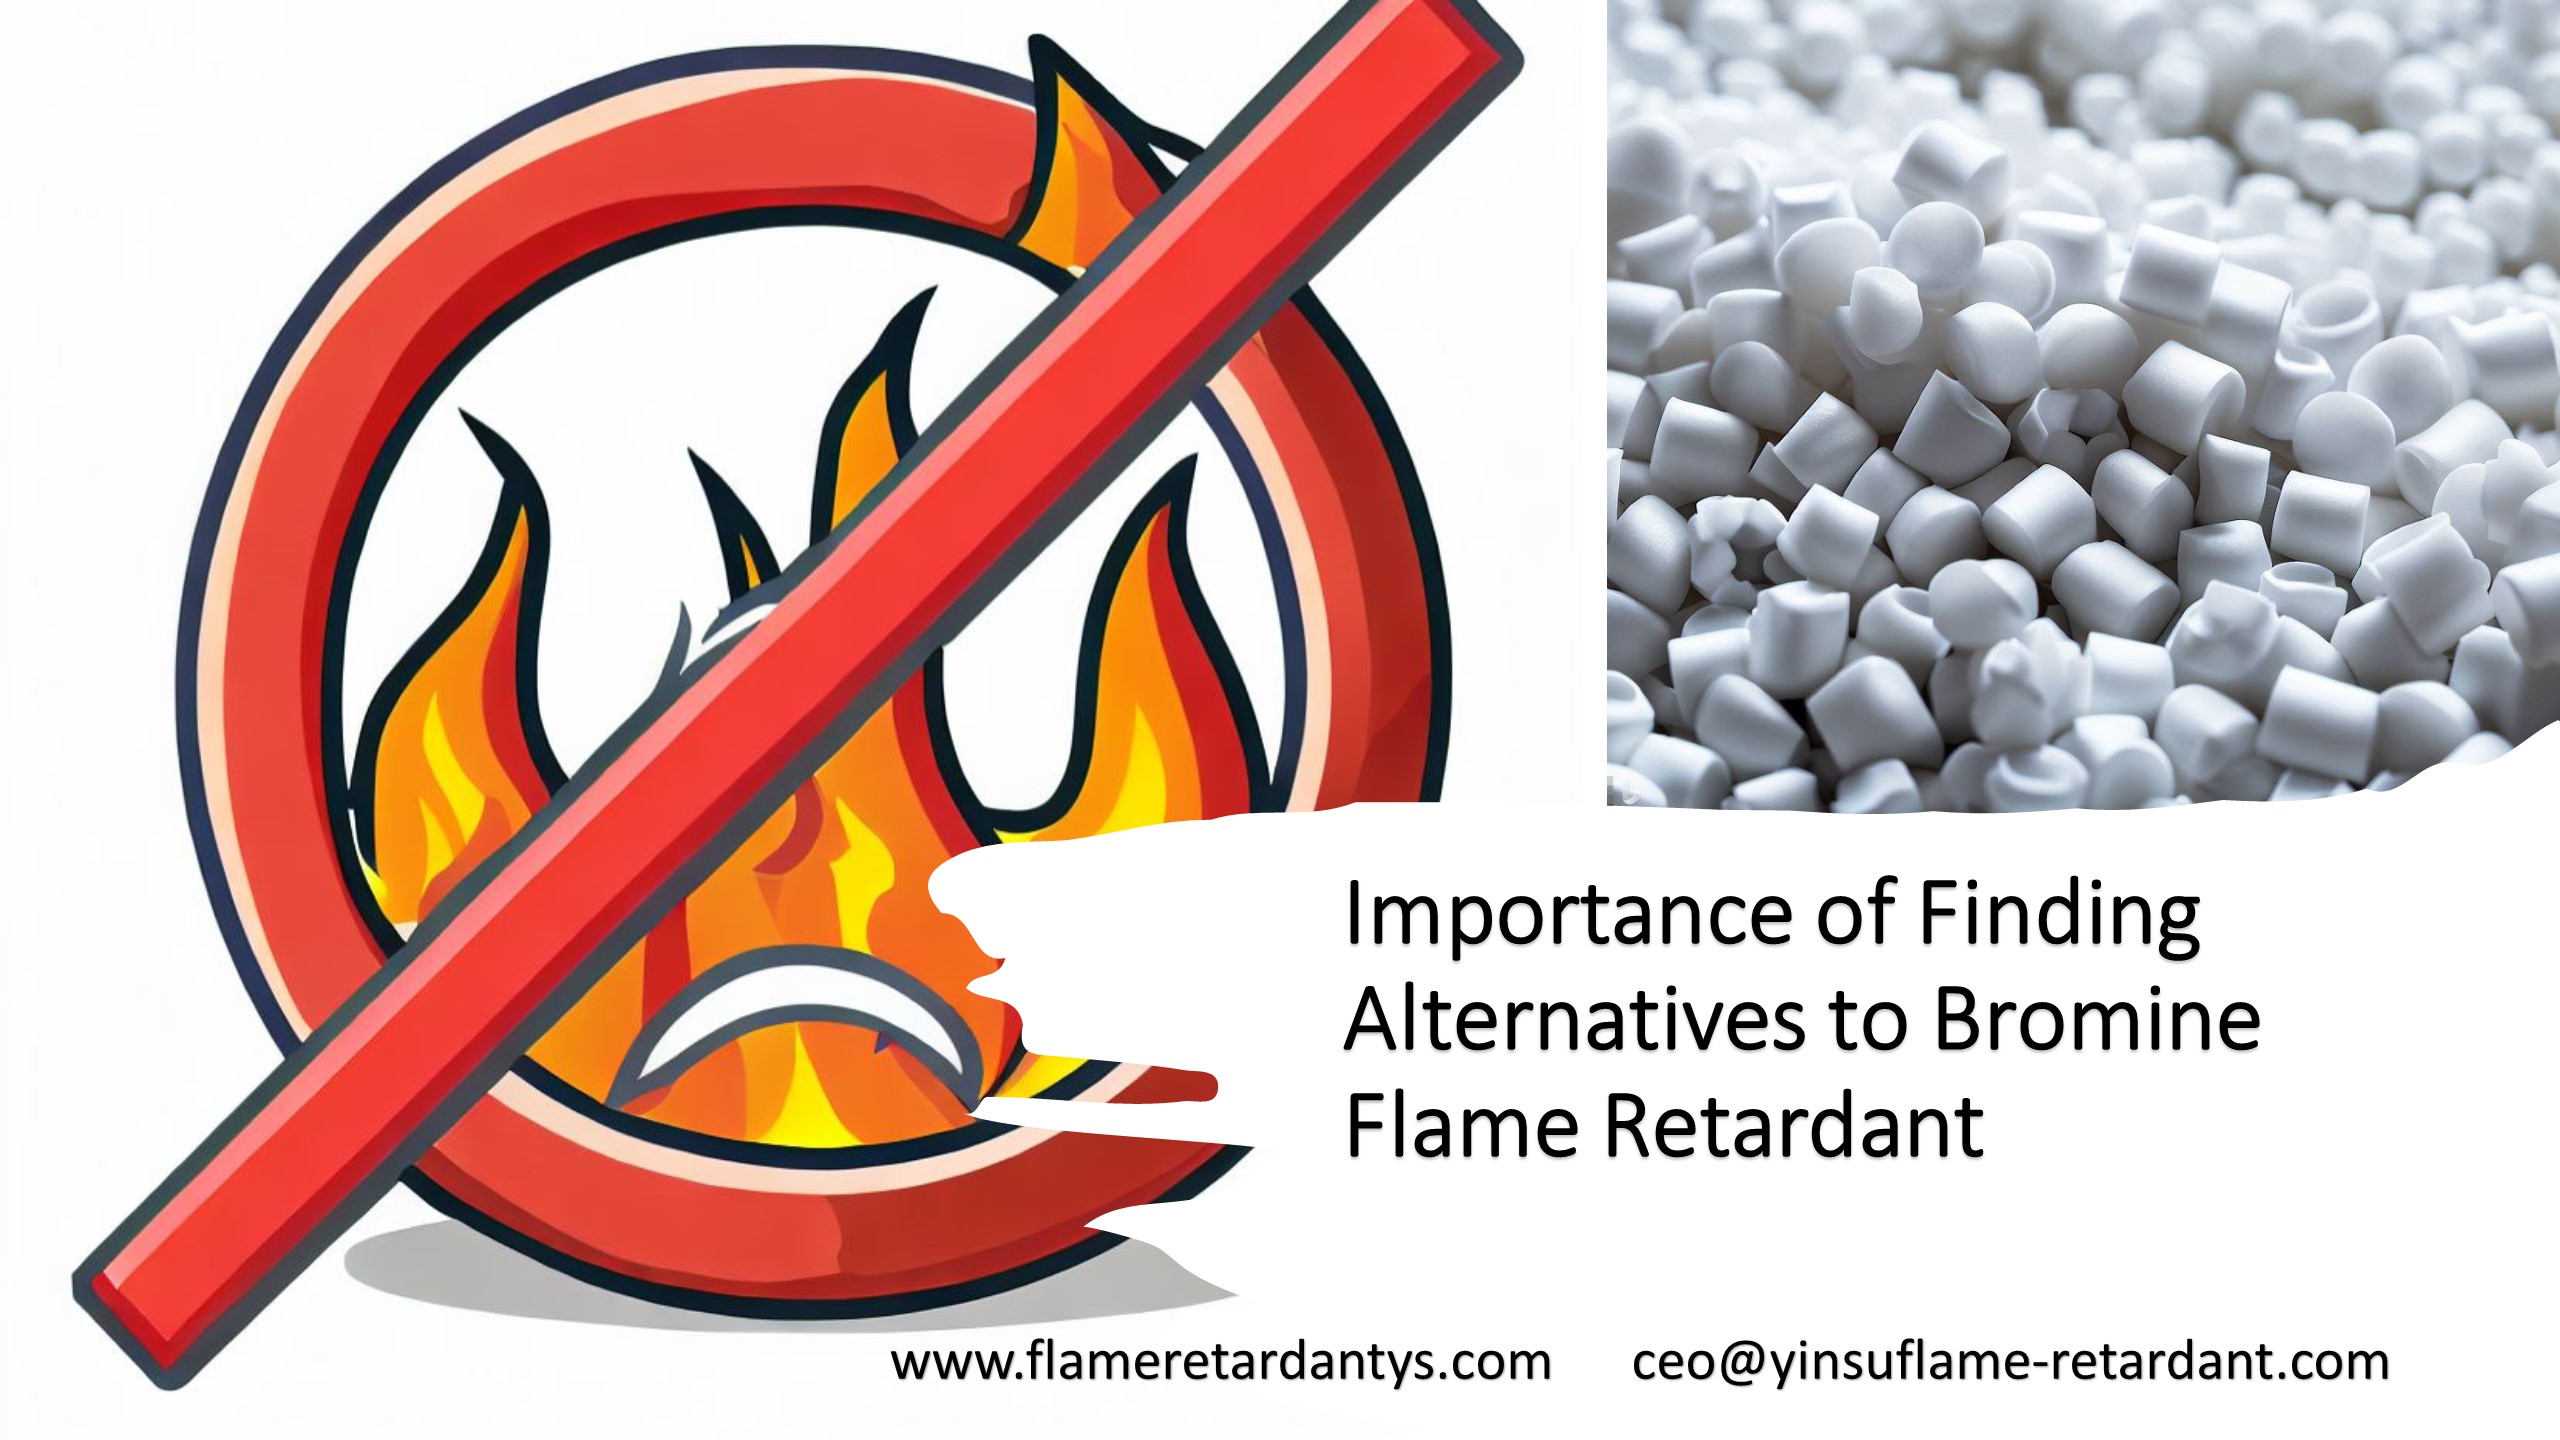 Safer Replacement To Bromine Flame Retardant